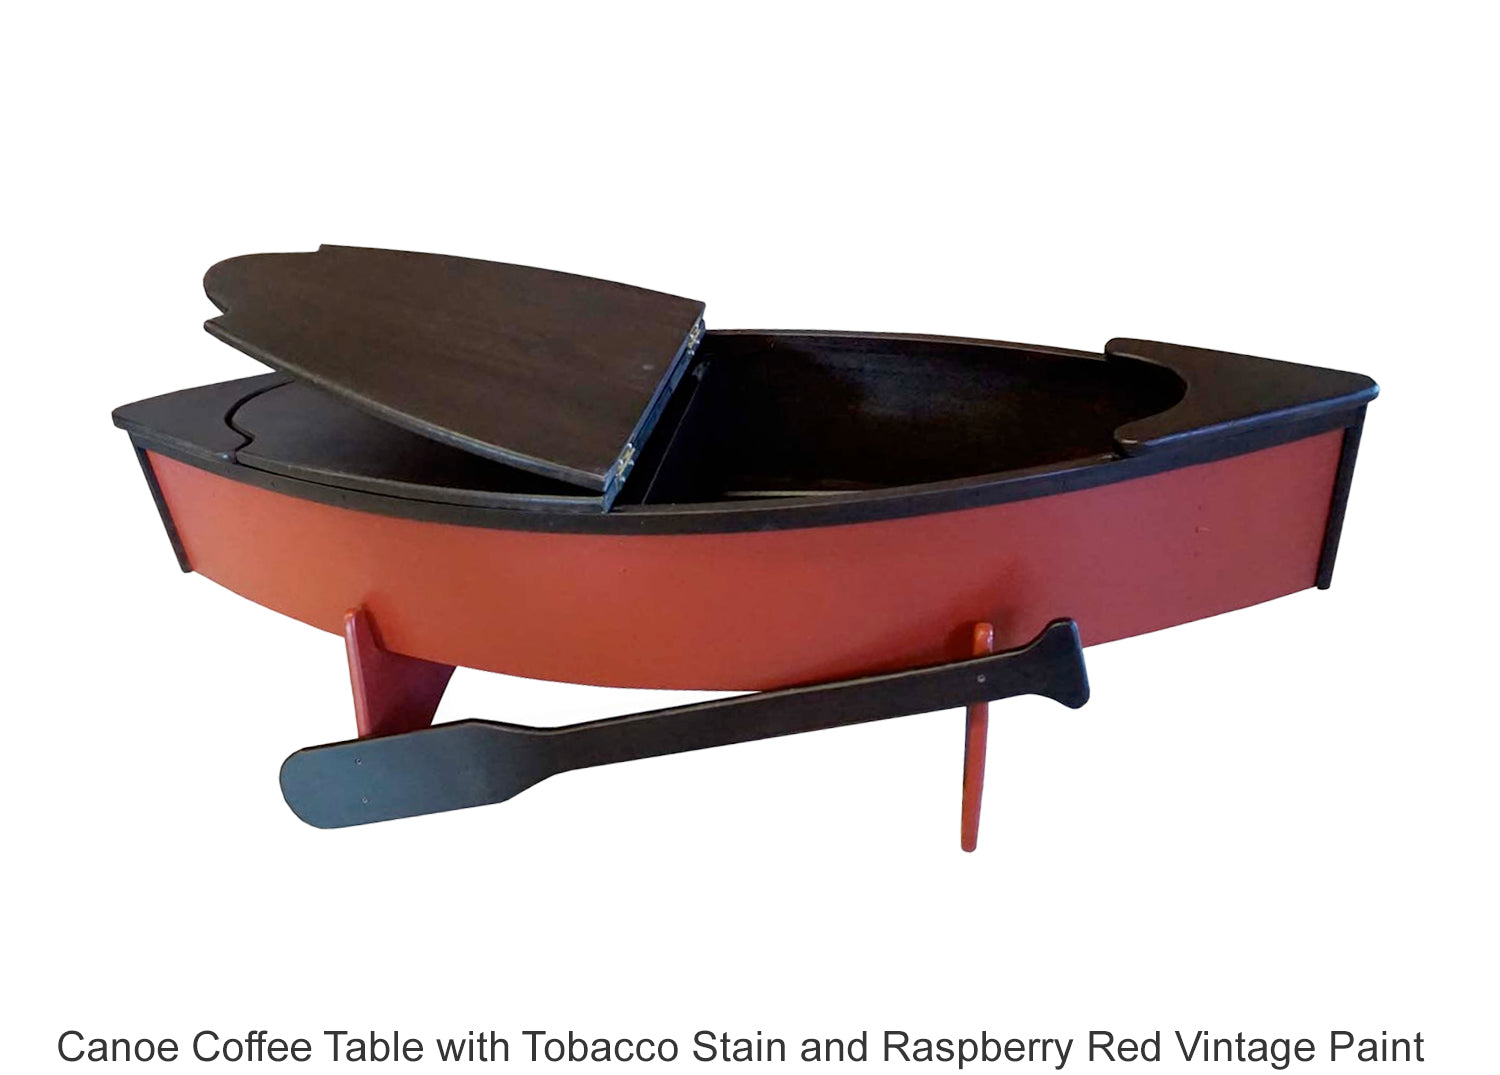 Canoe Coffee Table with Tobacco Stain and Raspberry Red Vintage Paint